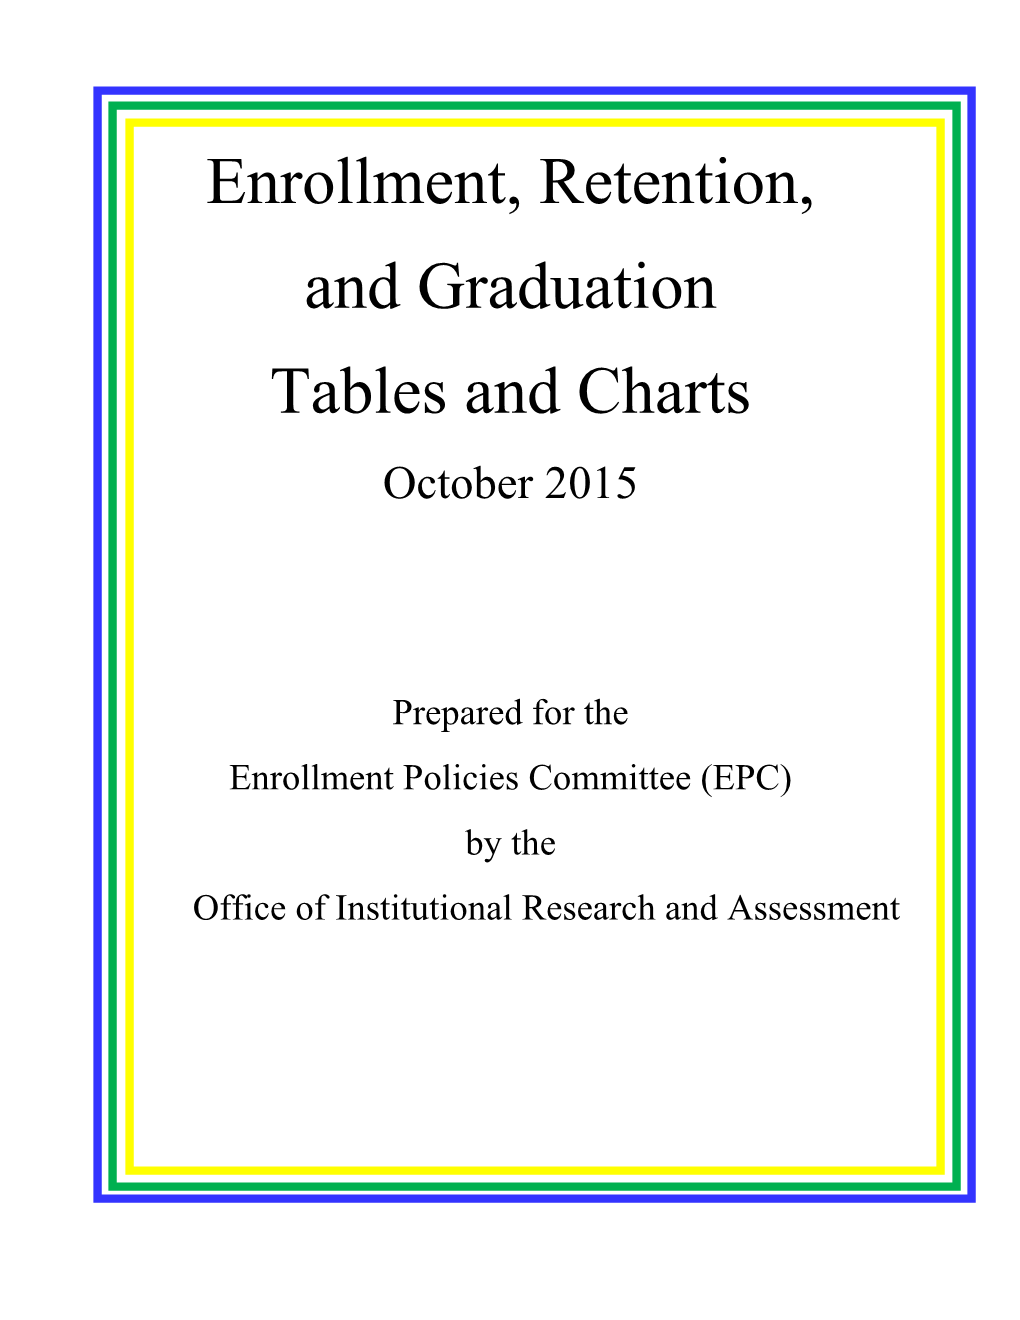 Enrollment, Retention, and Graduation Tables and Charts October 2015